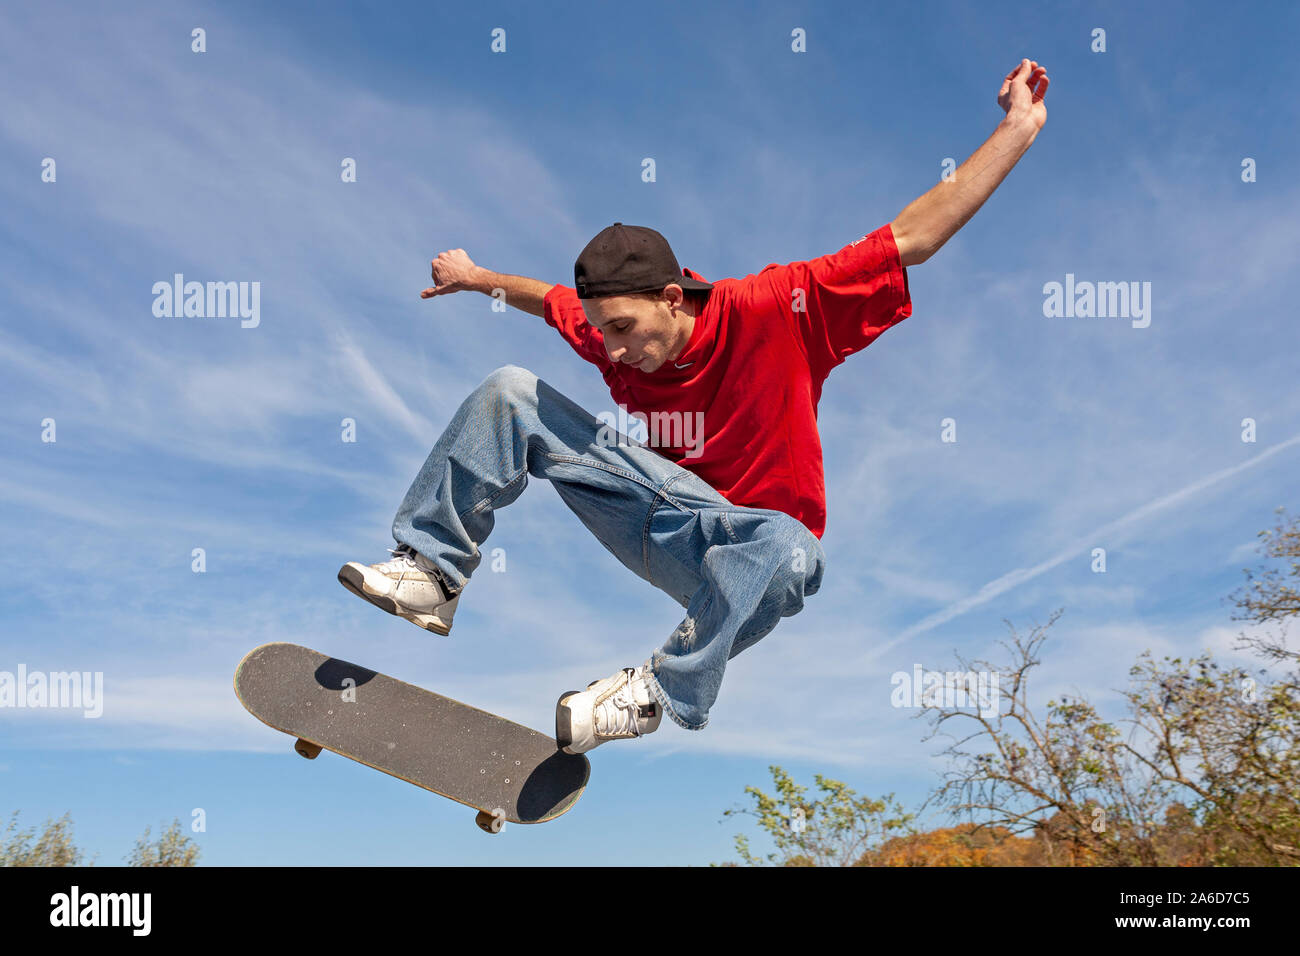 A young man is jumping with his skateboard. Stock Photo